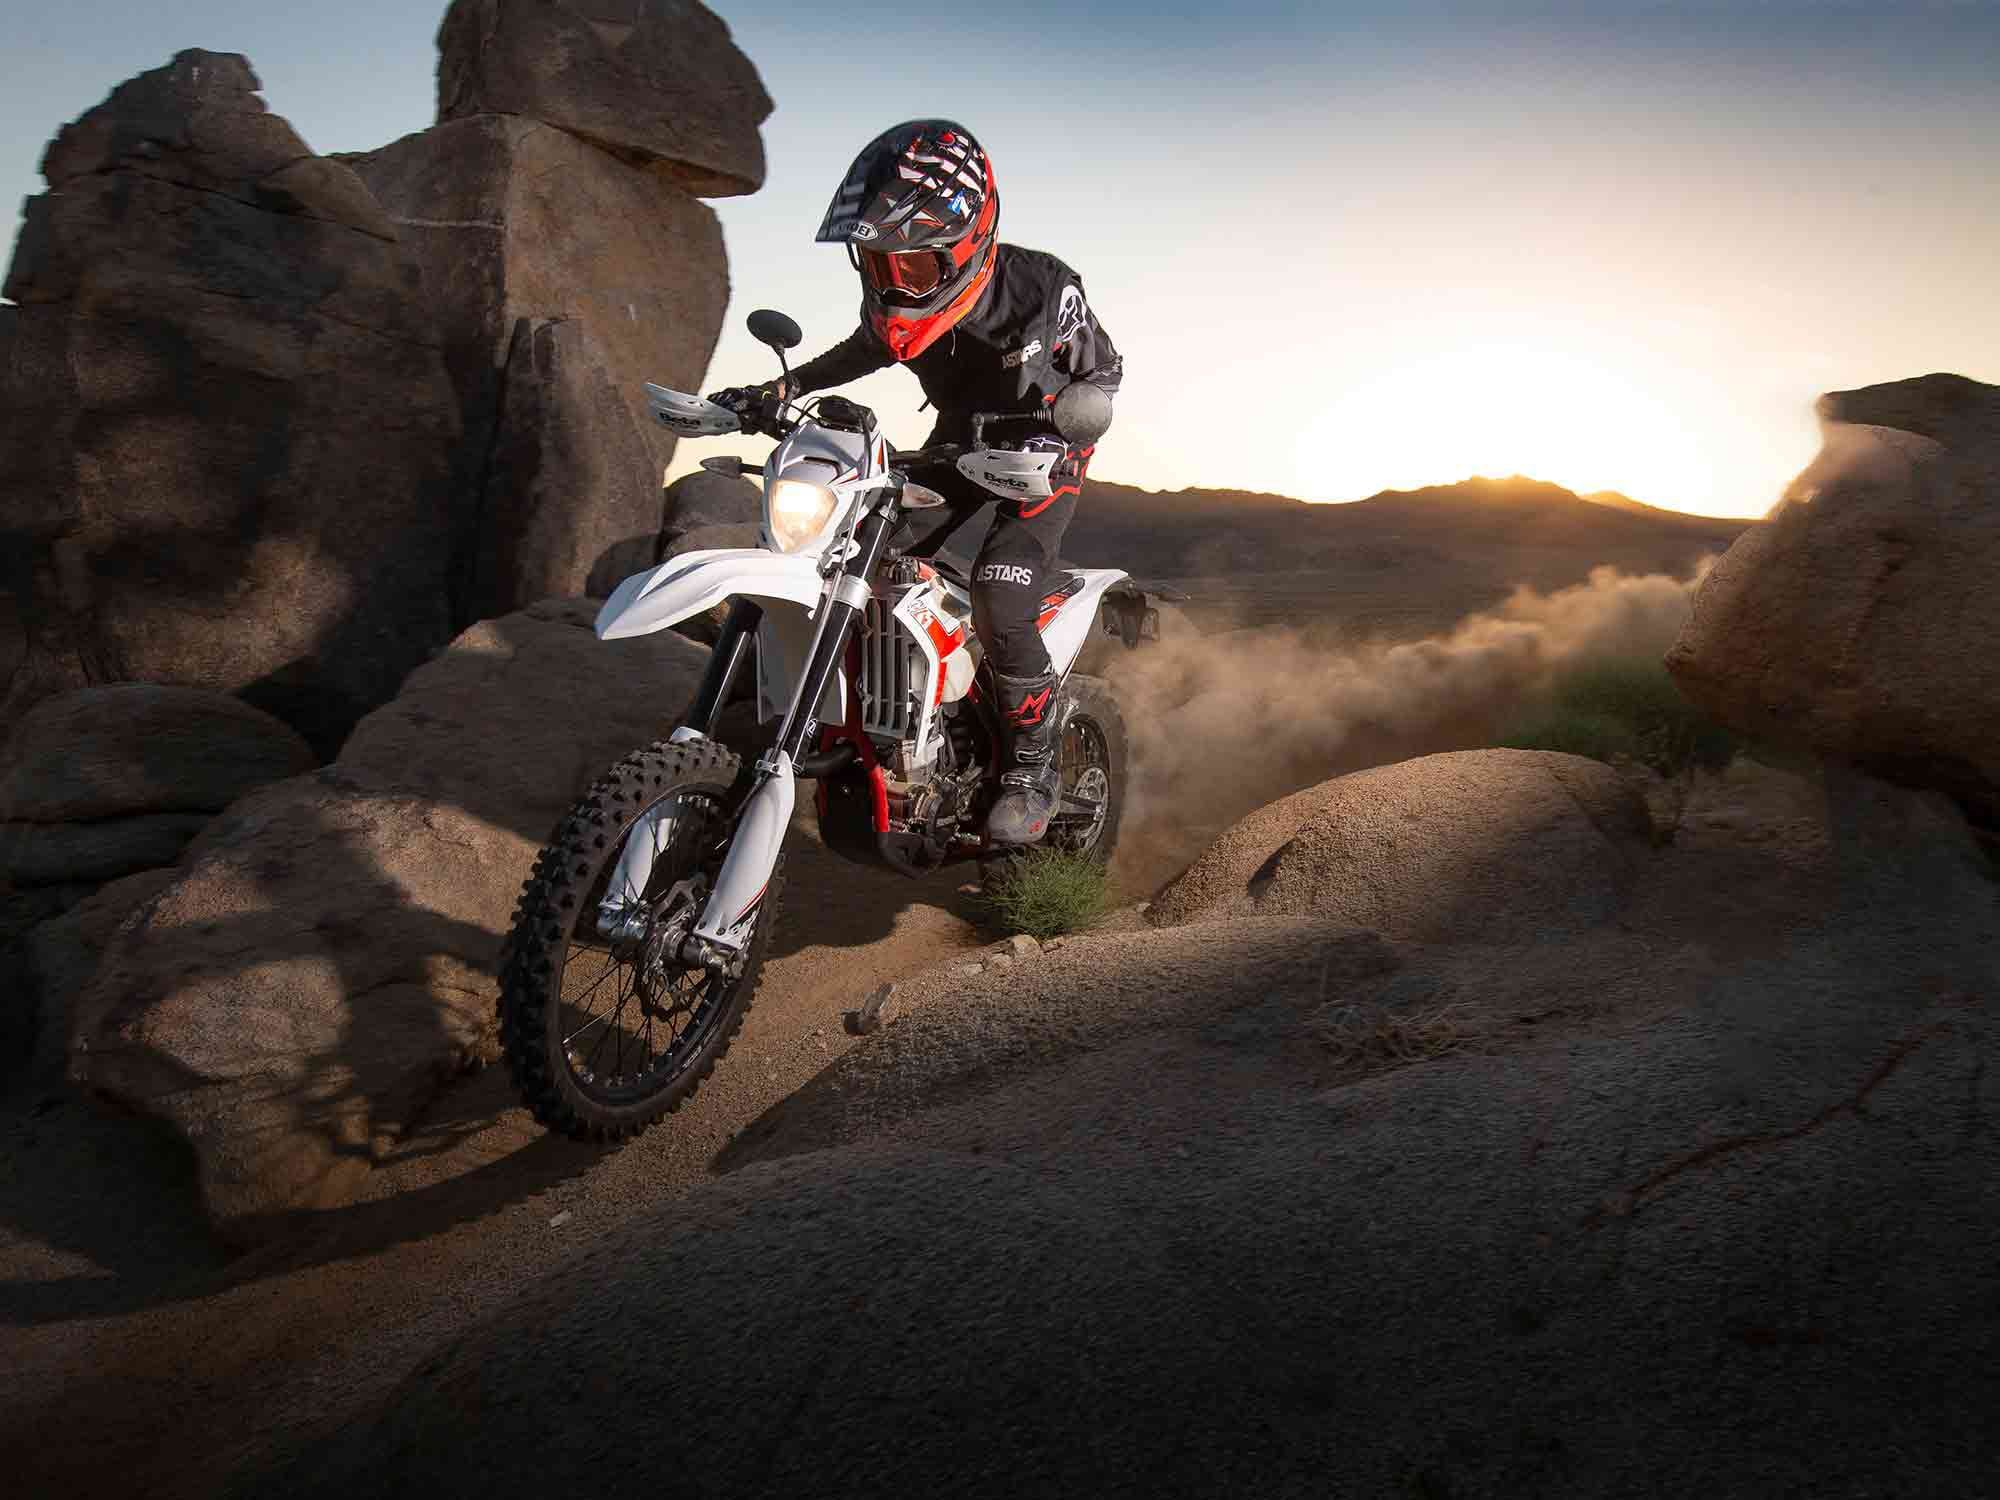 The 2020 Beta 500 RR-S puts a serious edge on dual sport fun with its exciting engine character and a superb-handling chassis.